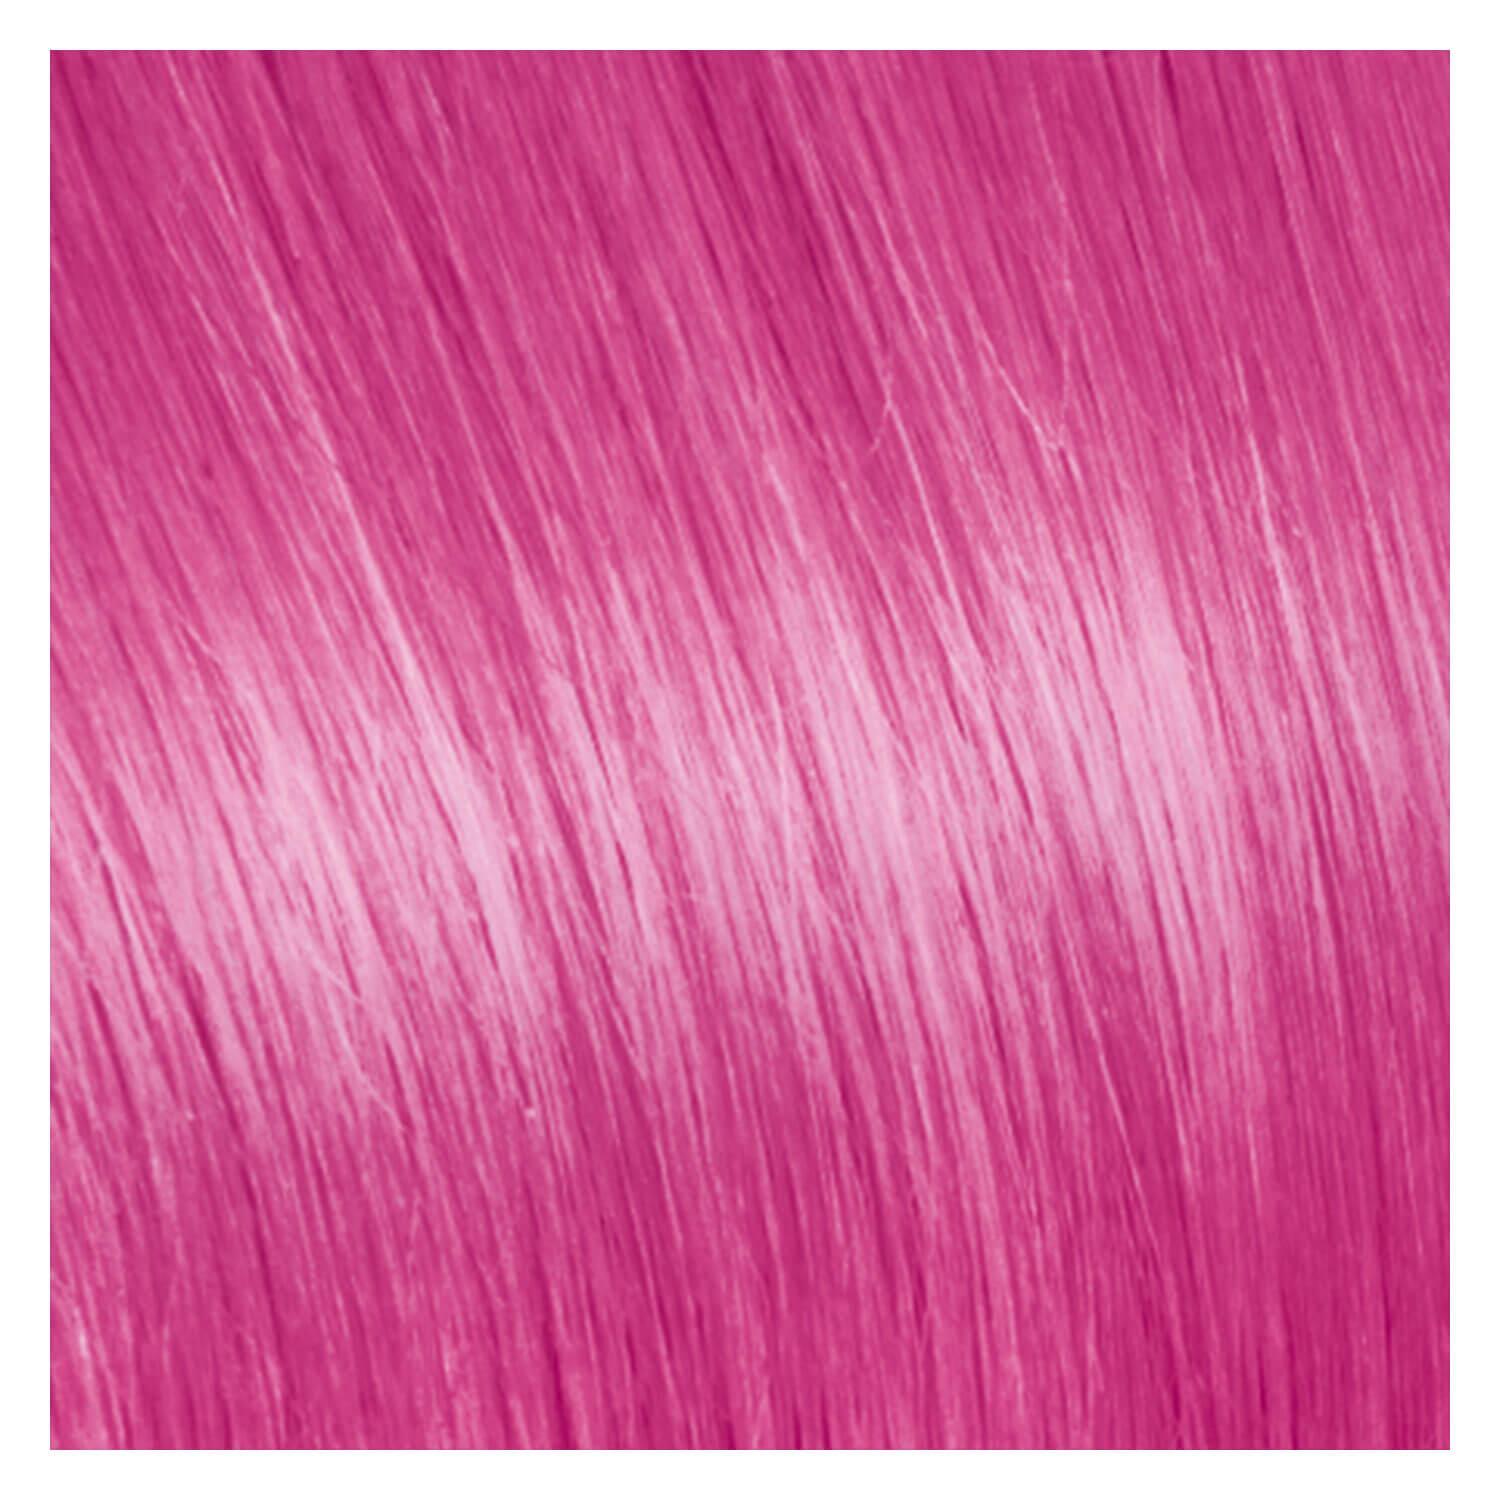 SHE Clip In-System Hair Extensions - Fuxia 40cm